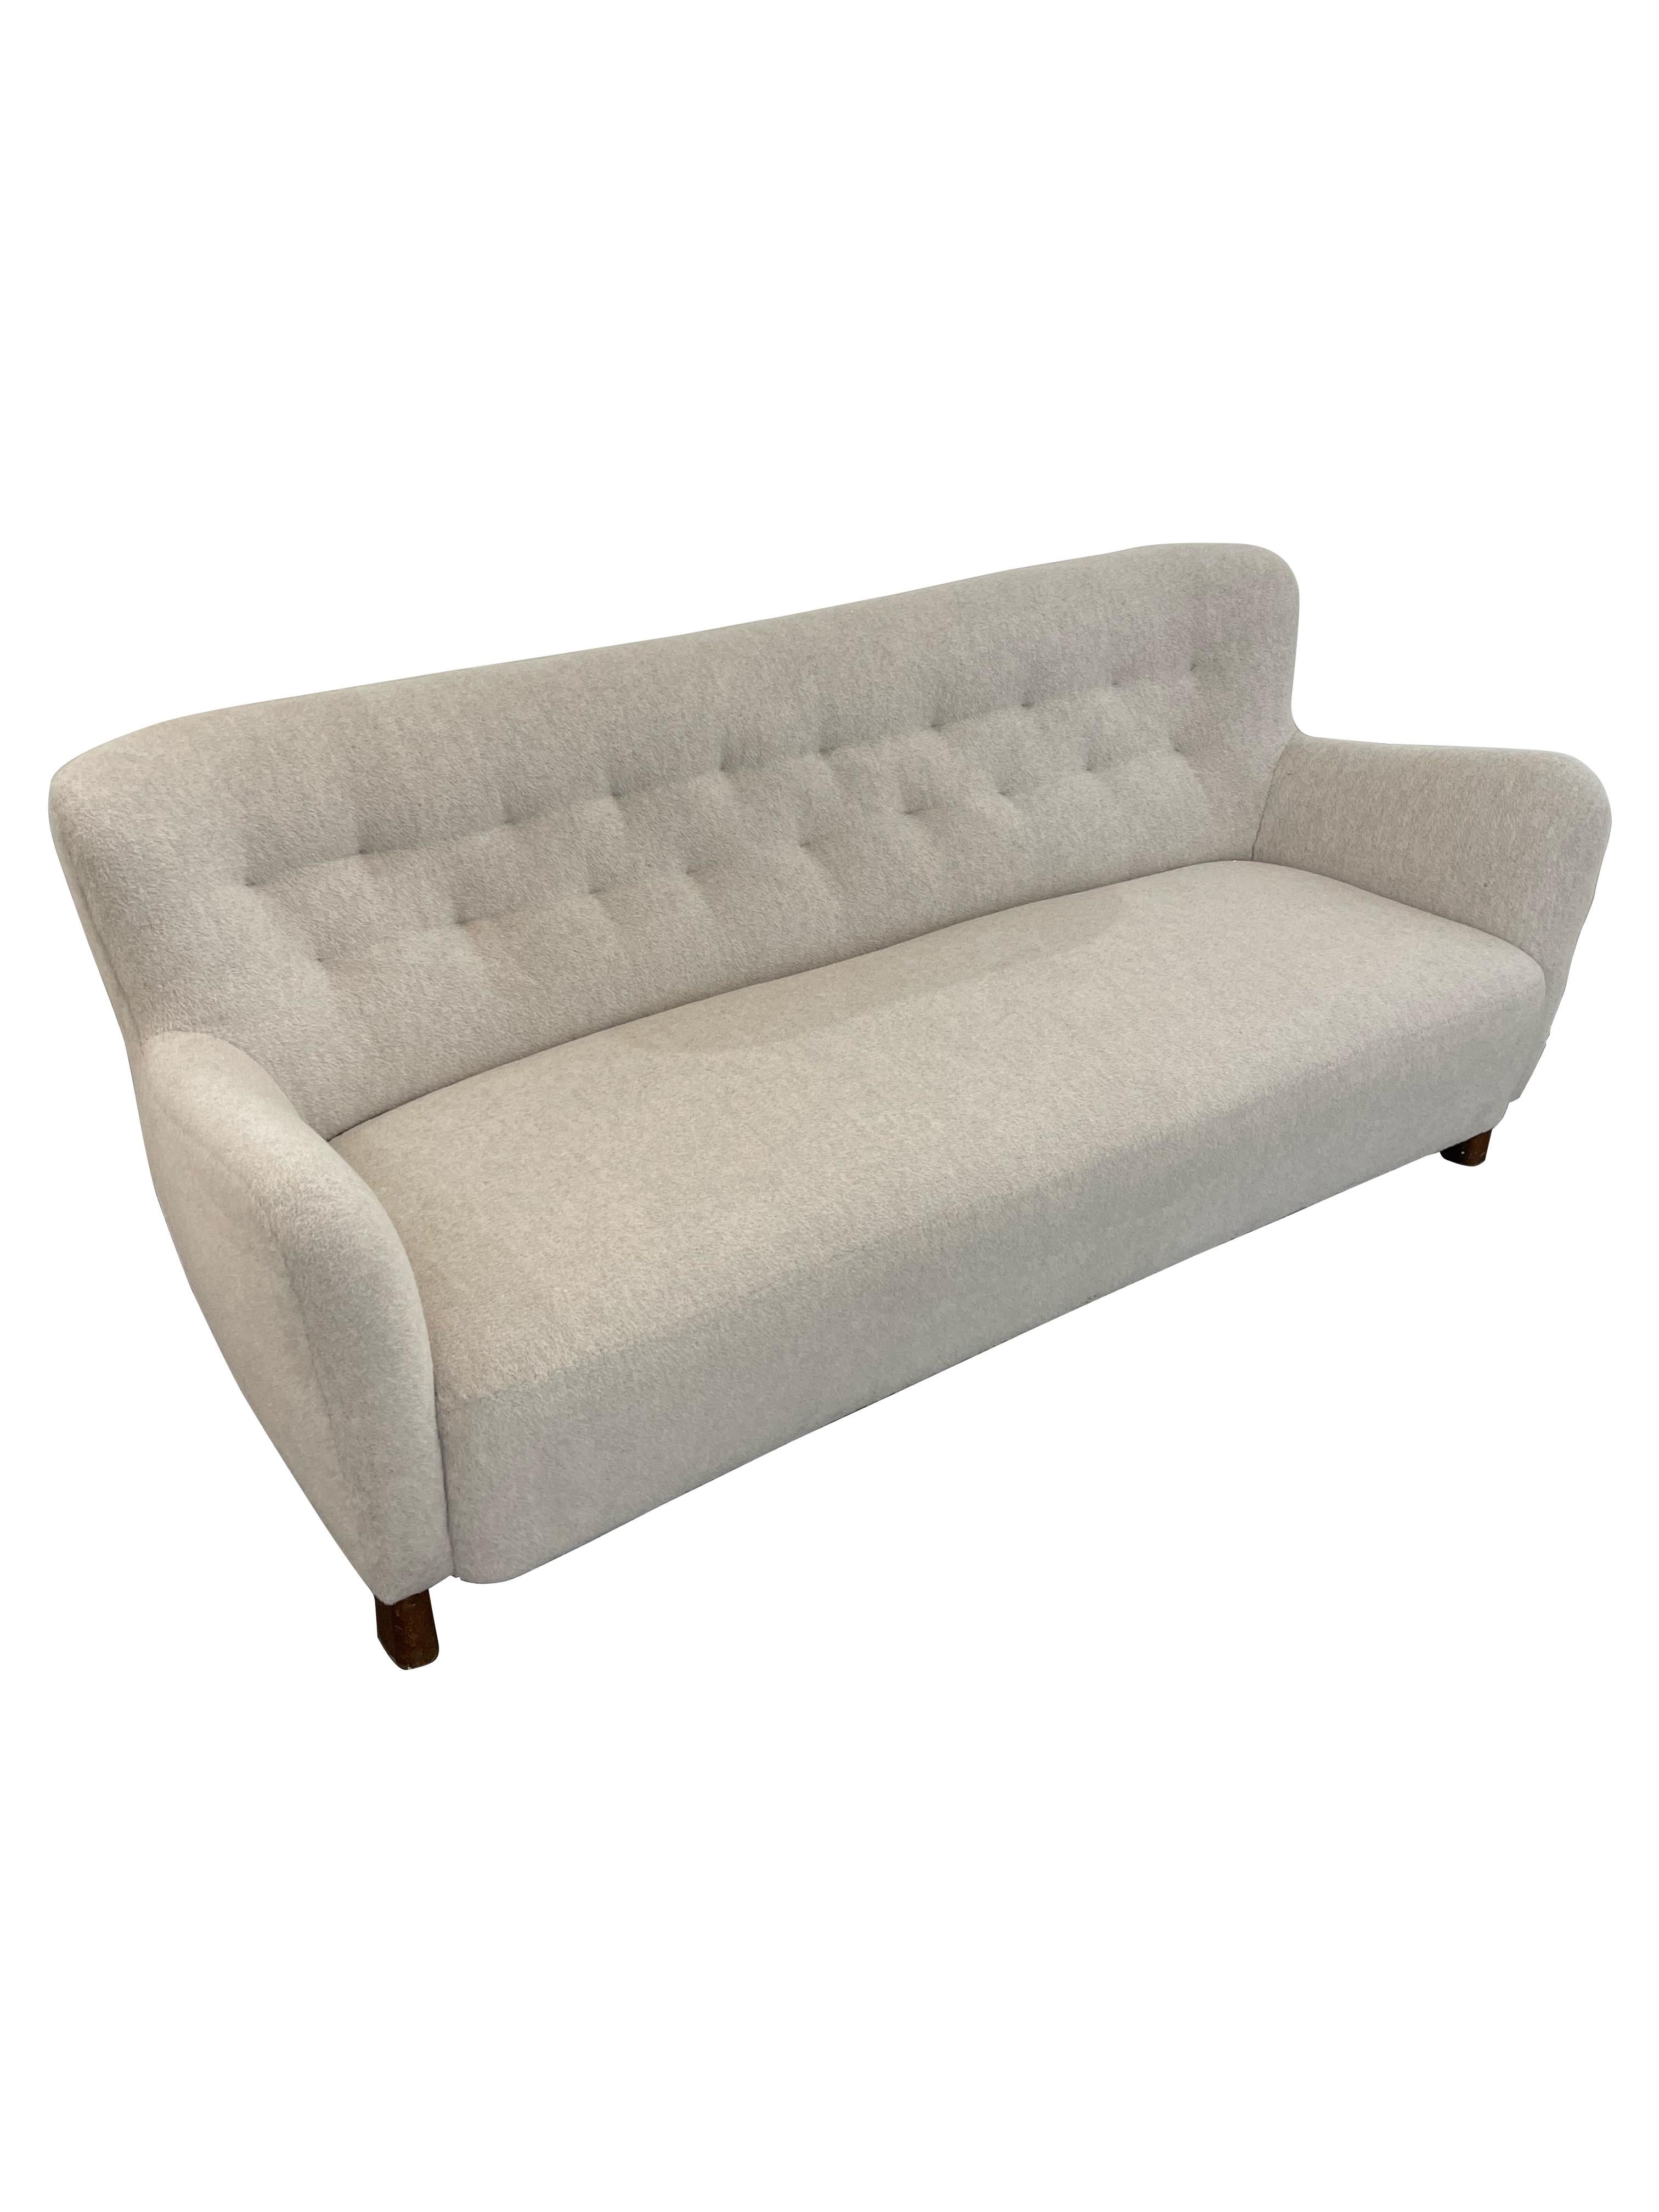 An iconic Fritz Hansen 3-Seat Sofa, a true masterpiece of Danish design. Crafted in Denmark in 1940, this sofa showcases the impeccable craftsmanship and attention to detail that Hansen is renowned for. The sofa is upholstered in sumptuous brushed